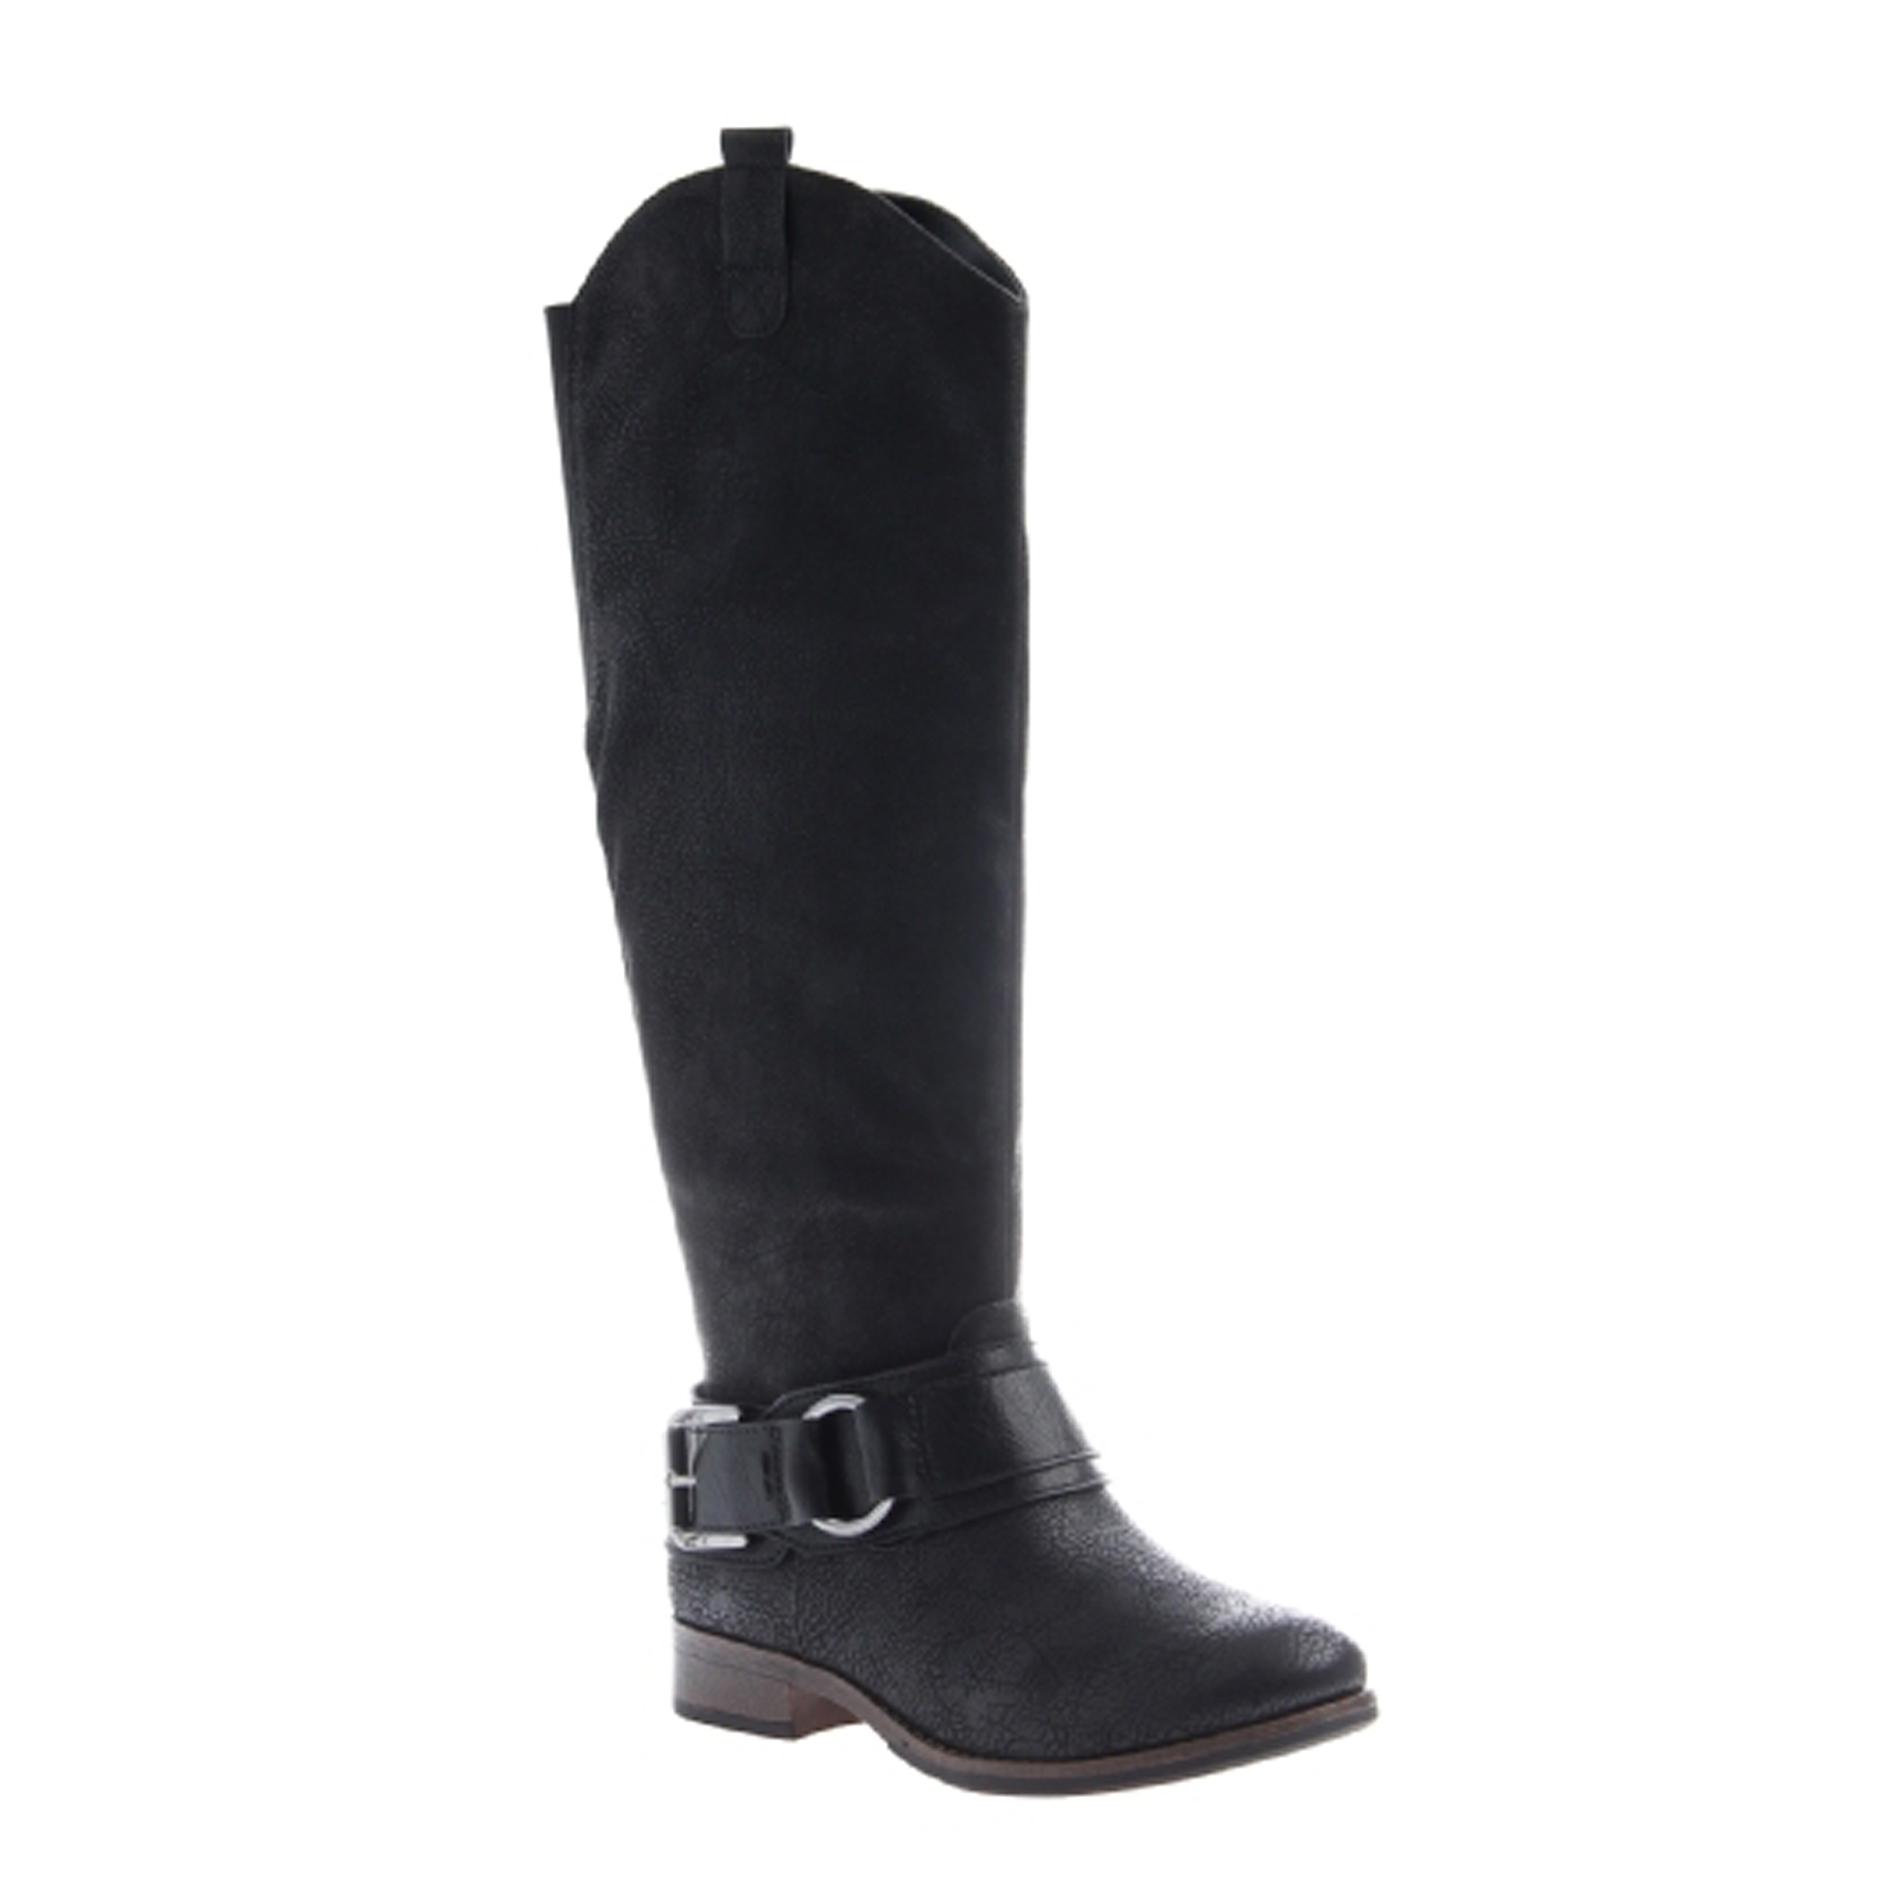 Madeline Women's Buttery Riding Boot - Black